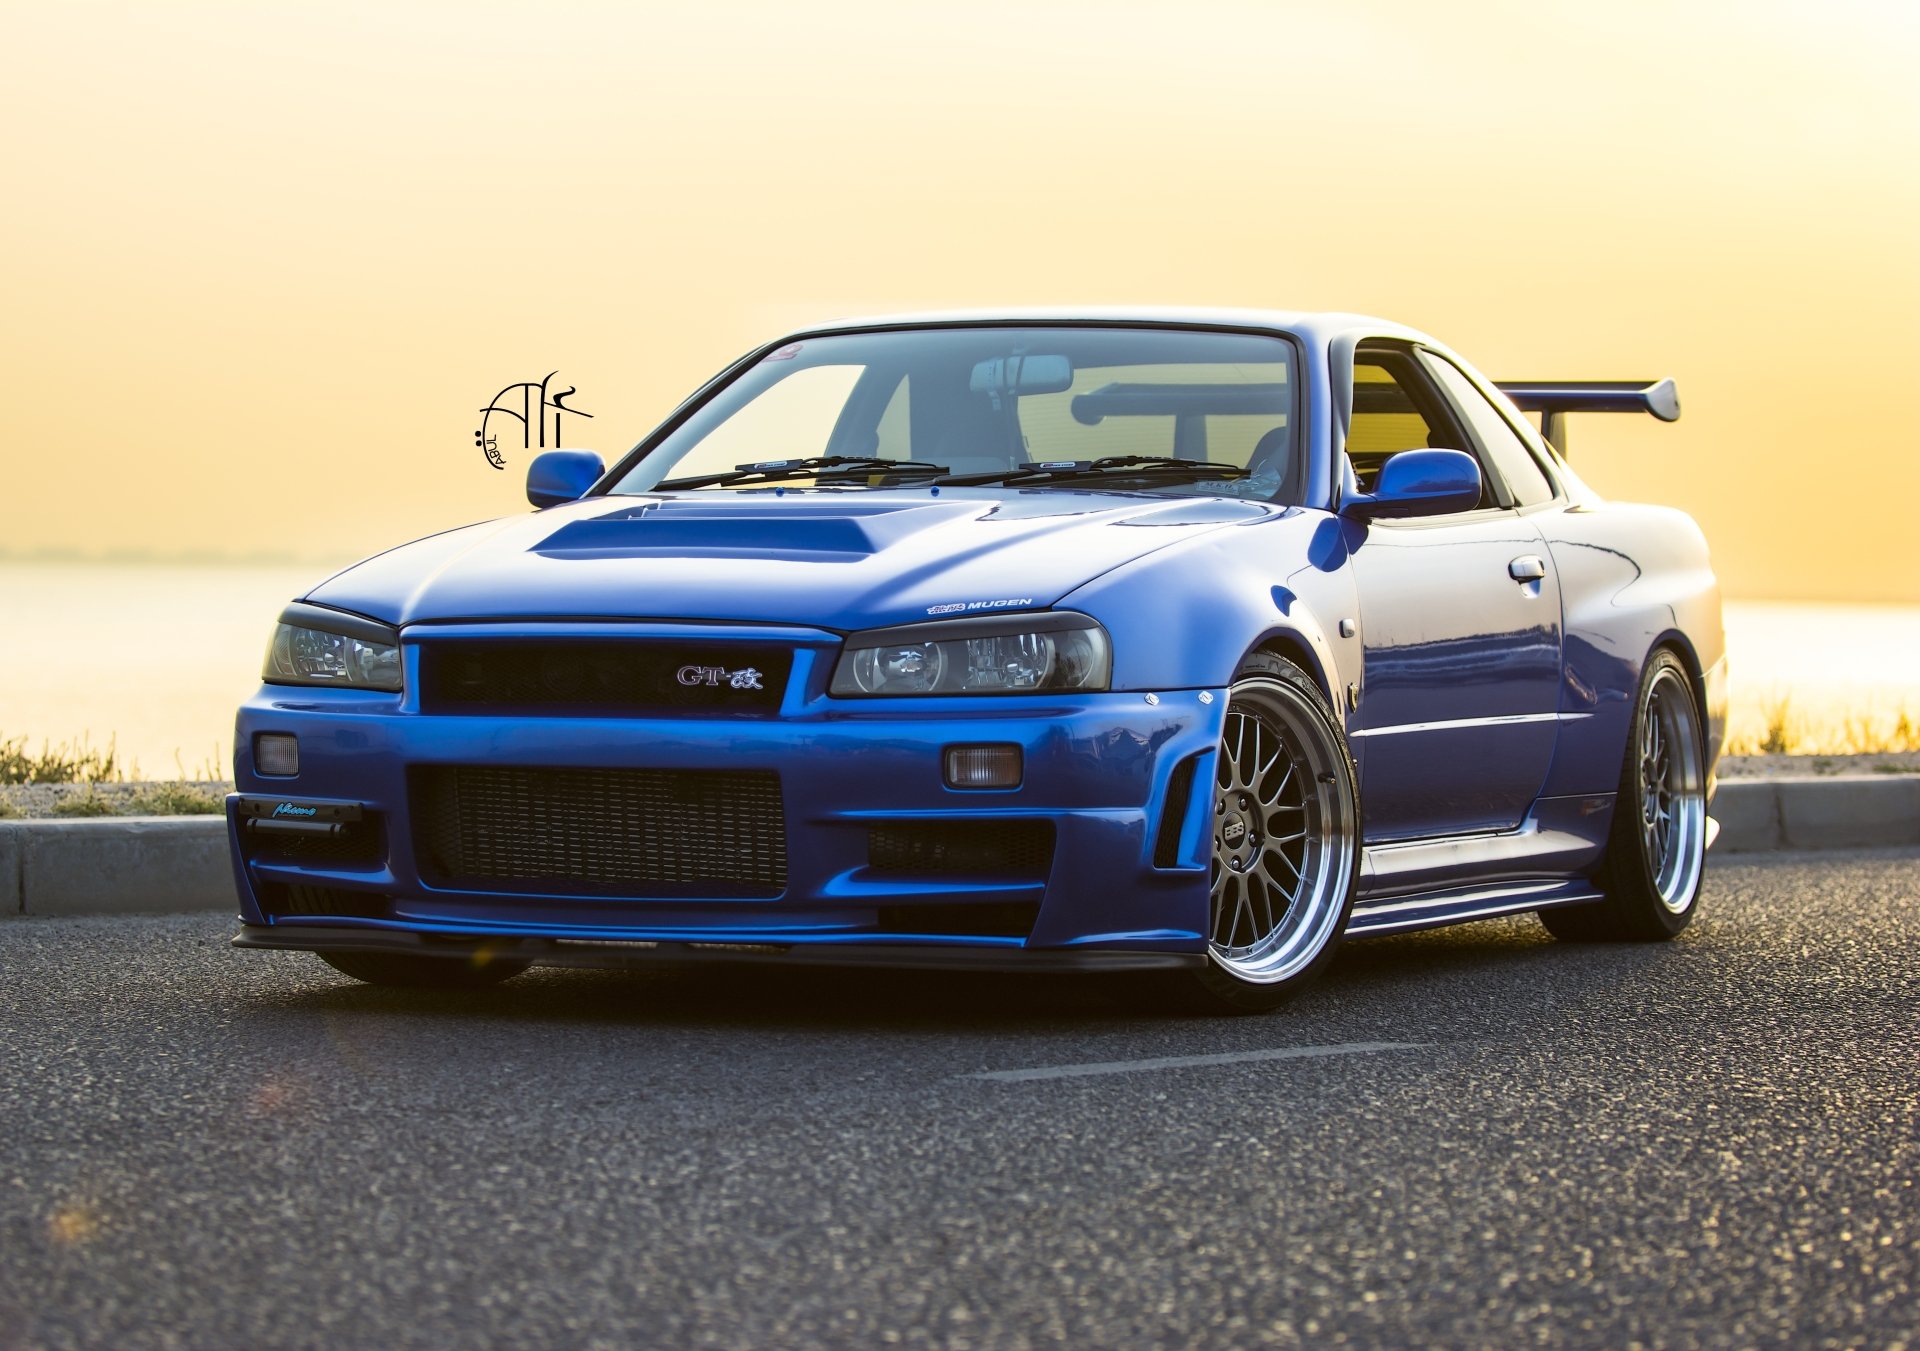 60+ Nissan Skyline HD Wallpapers and Backgrounds